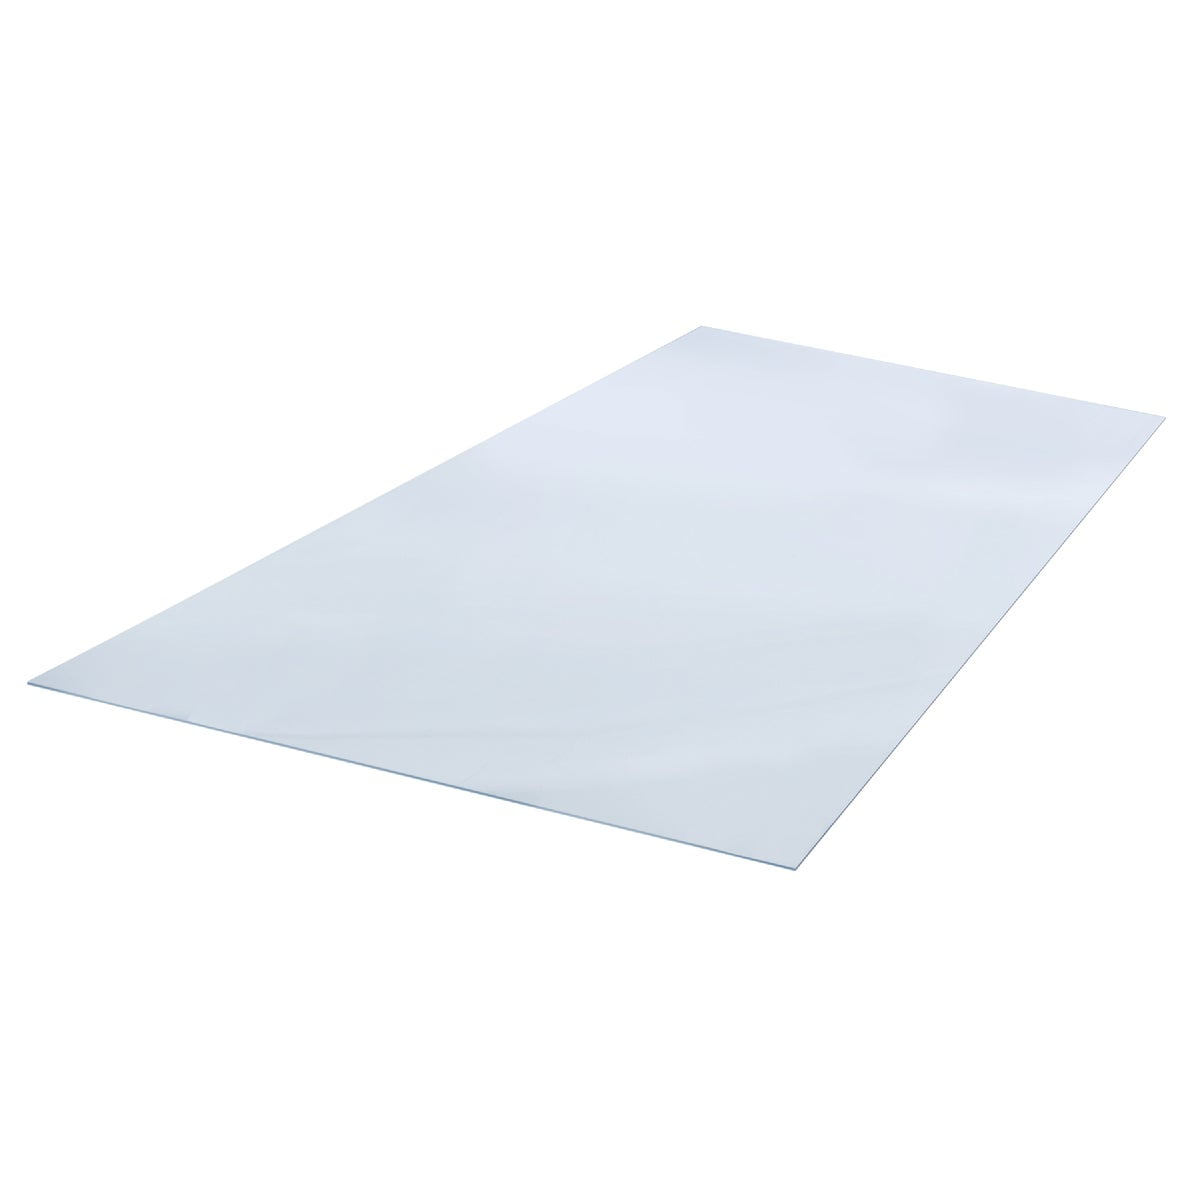 Polycarbonate .118-1/8 Thick Lexan Sheet Clear 24 x 24 Nominal